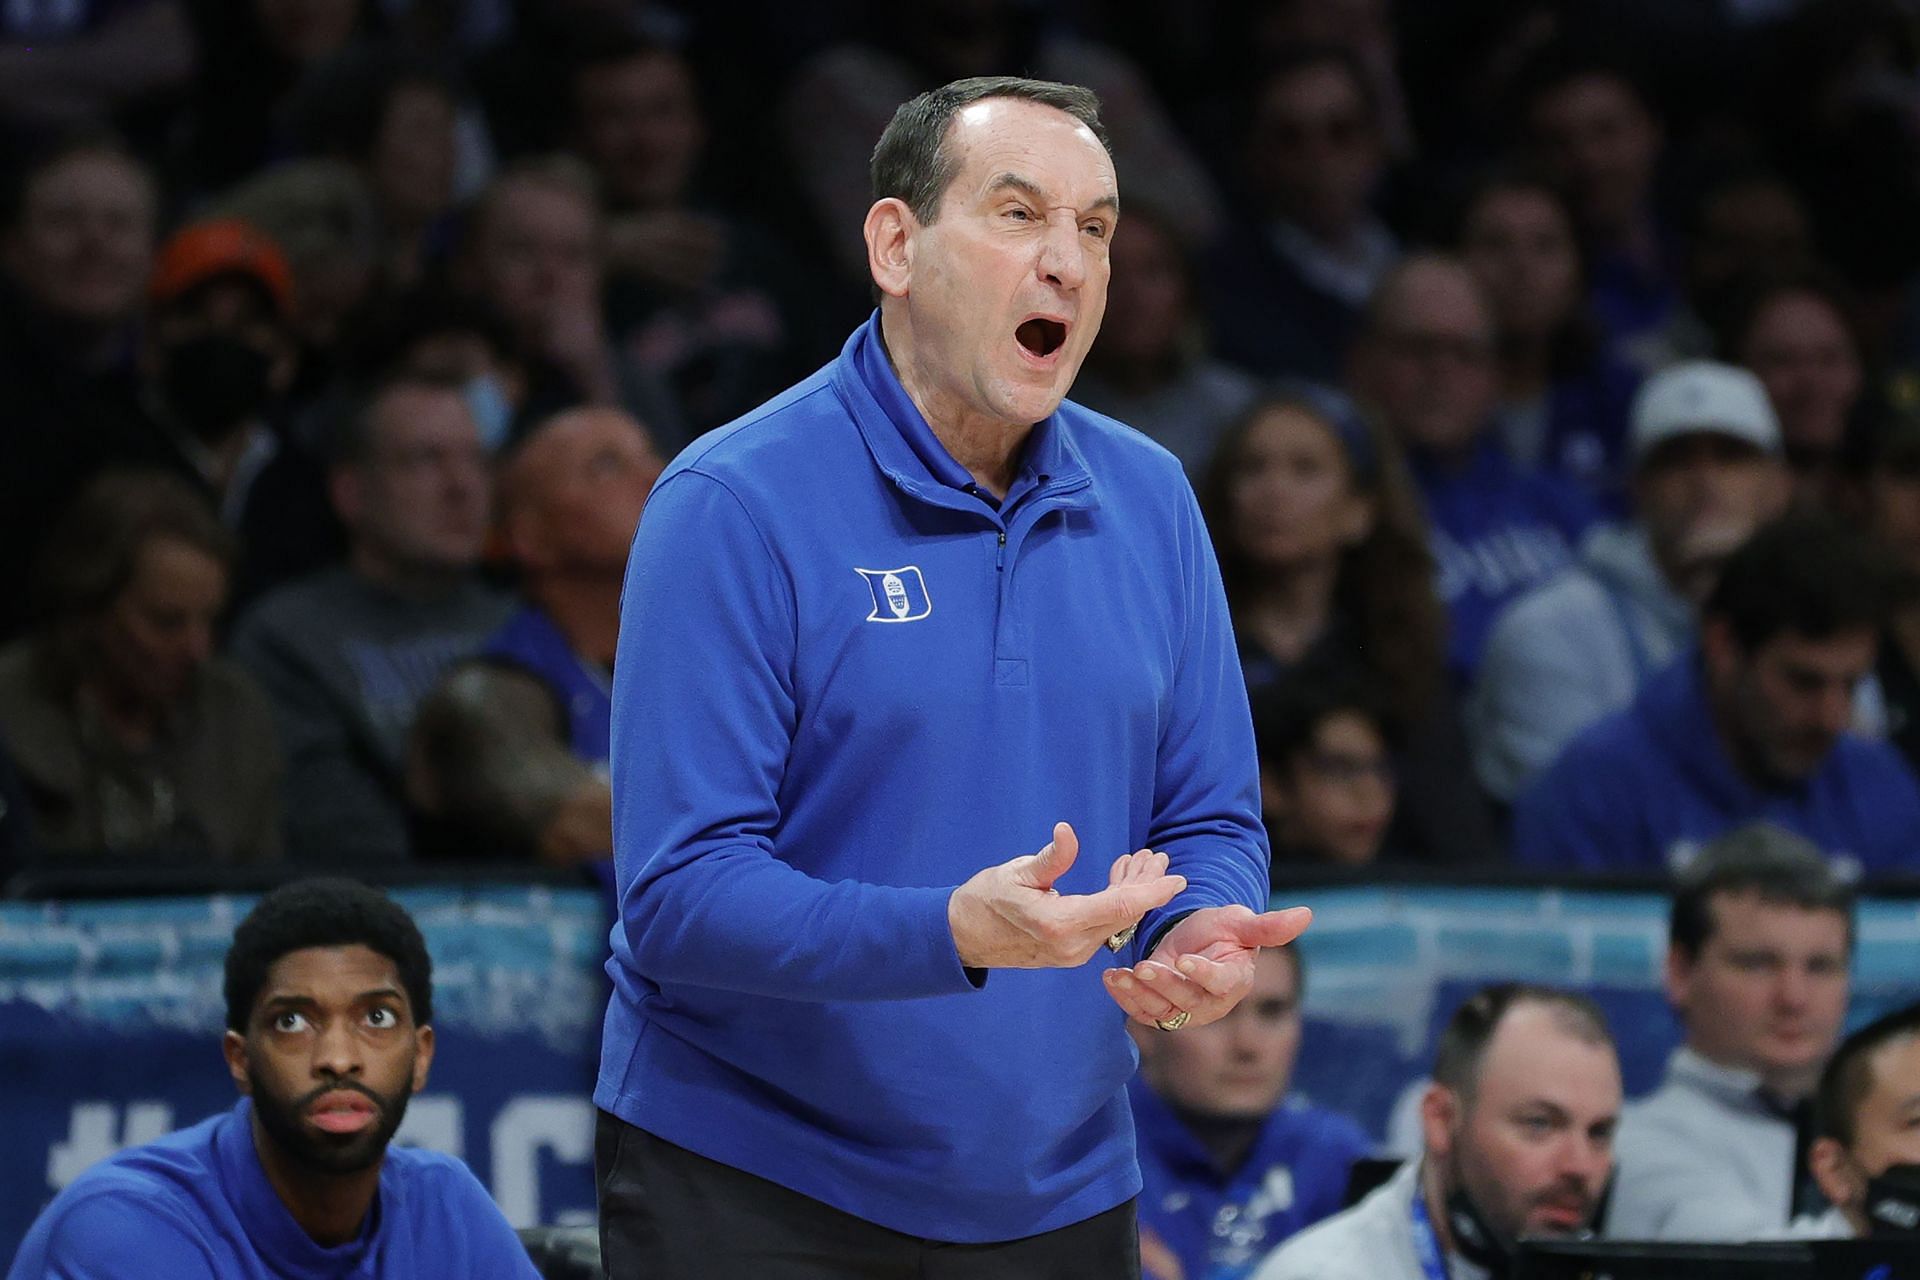 Coach K is at the end of a legendary coaching career.